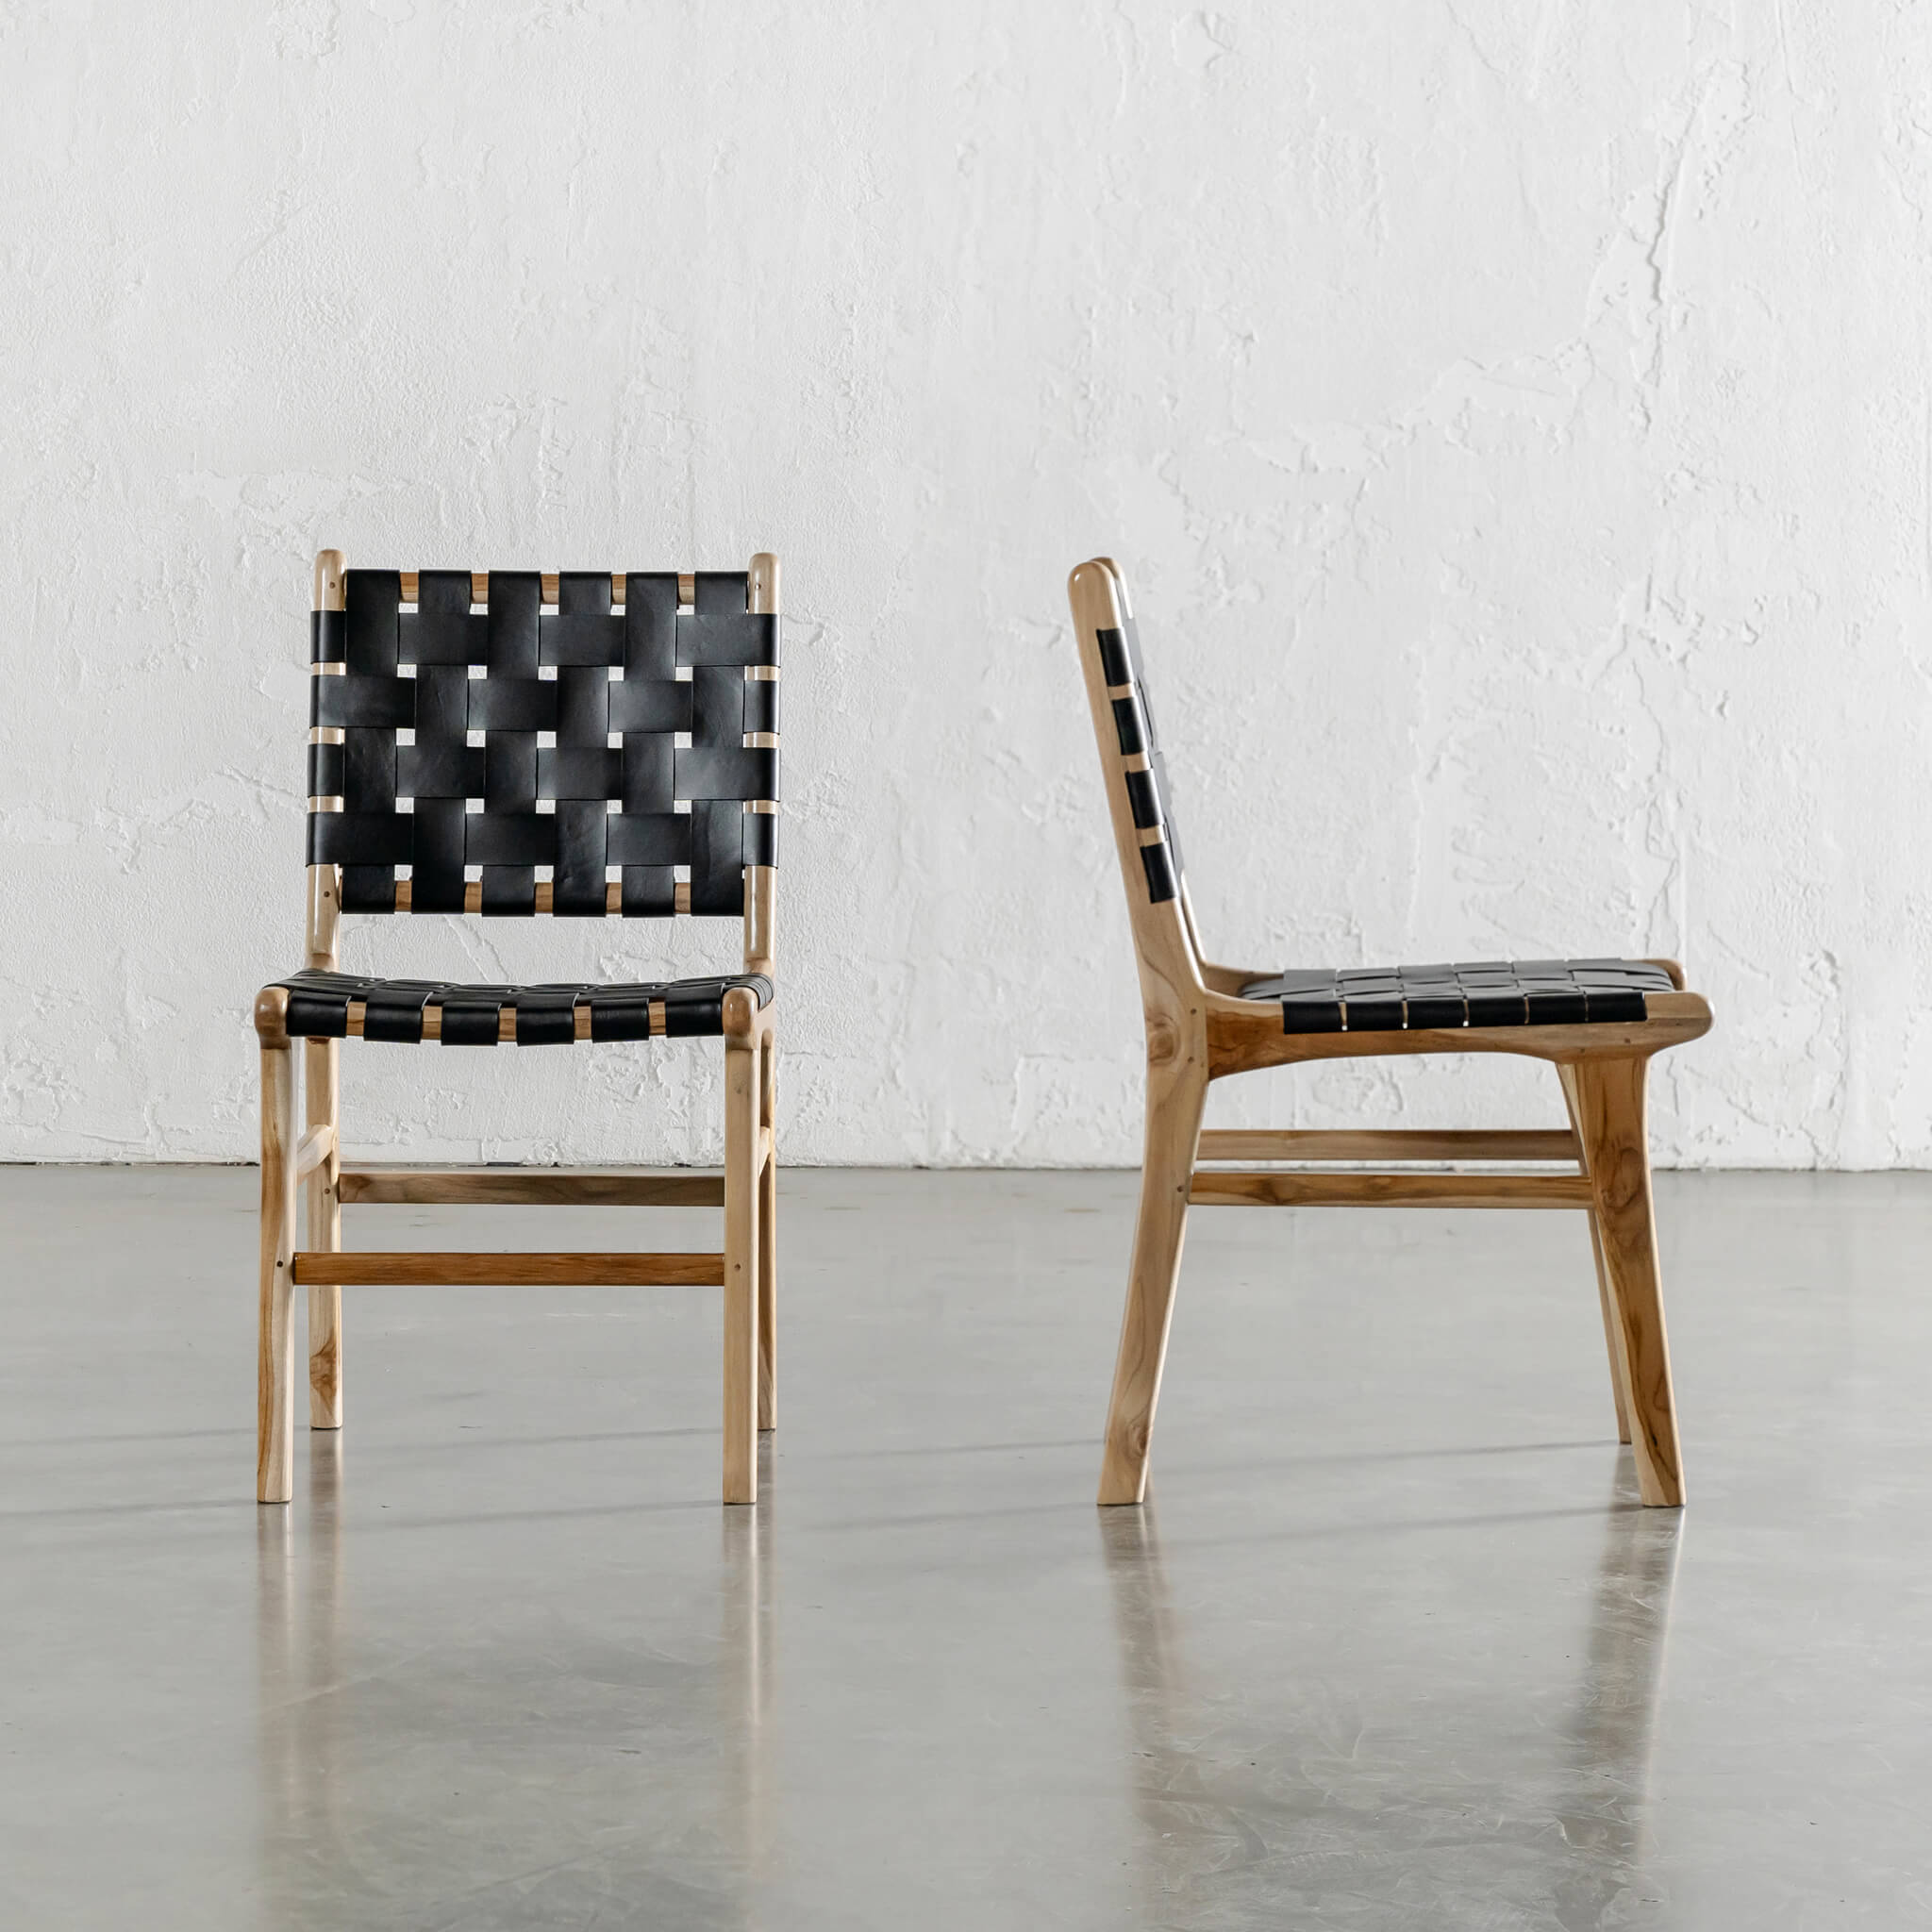 WOVEN LEATHER CHAIRS + BENCH SEATING